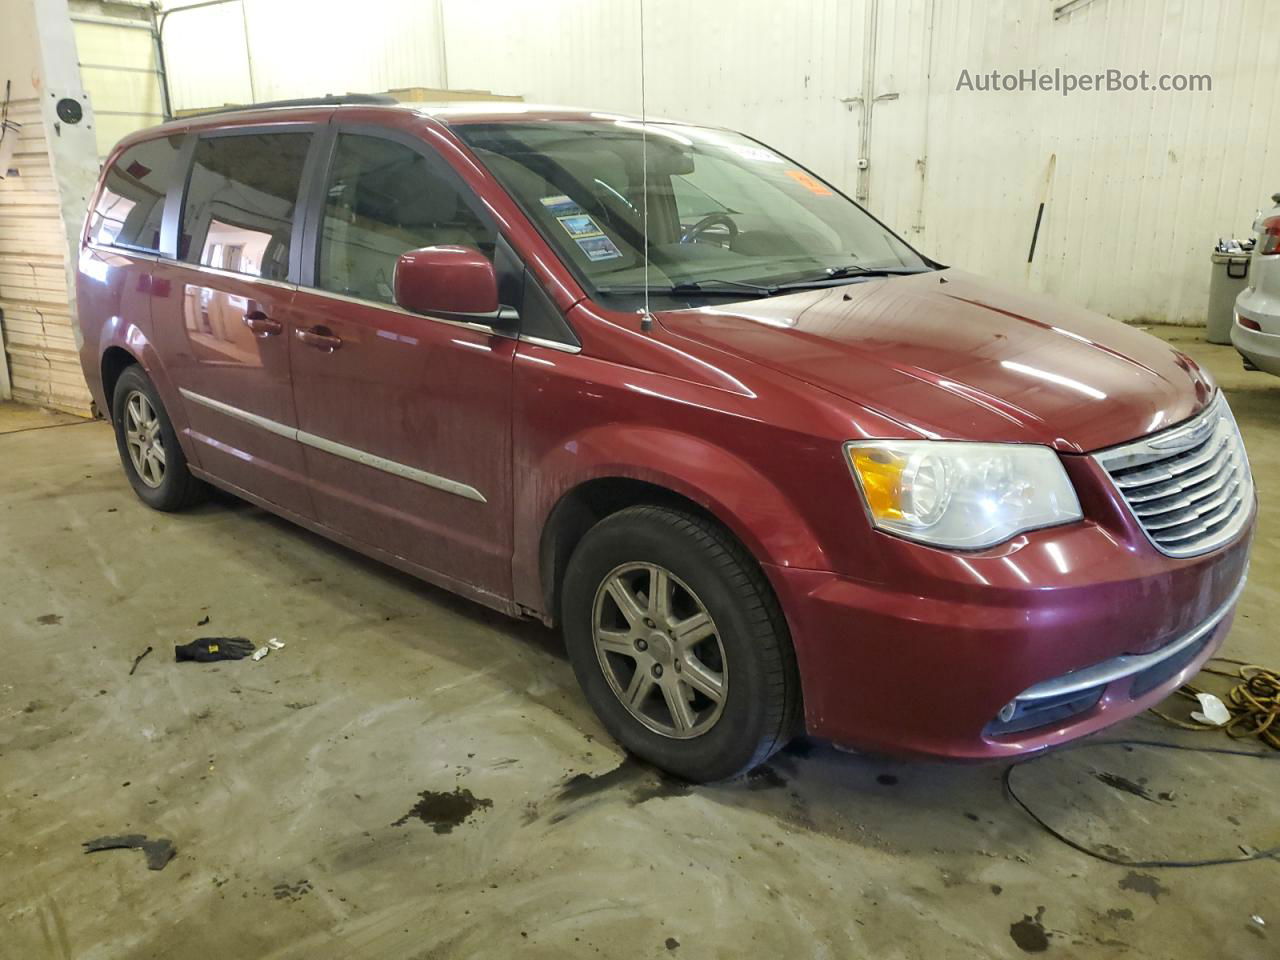 2011 Chrysler Town & Country Touring Maroon vin: 2A4RR5DG5BR687934